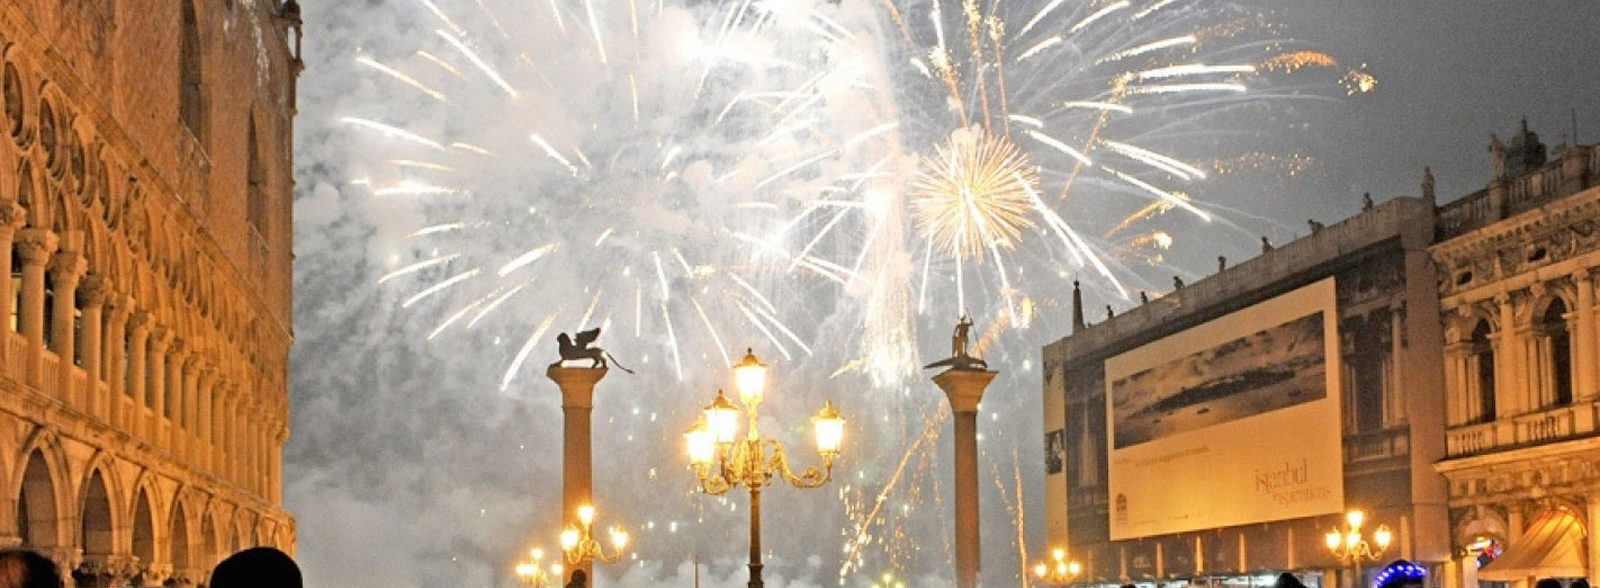 How to celebrate New Year’s Eve in Venice: things to do